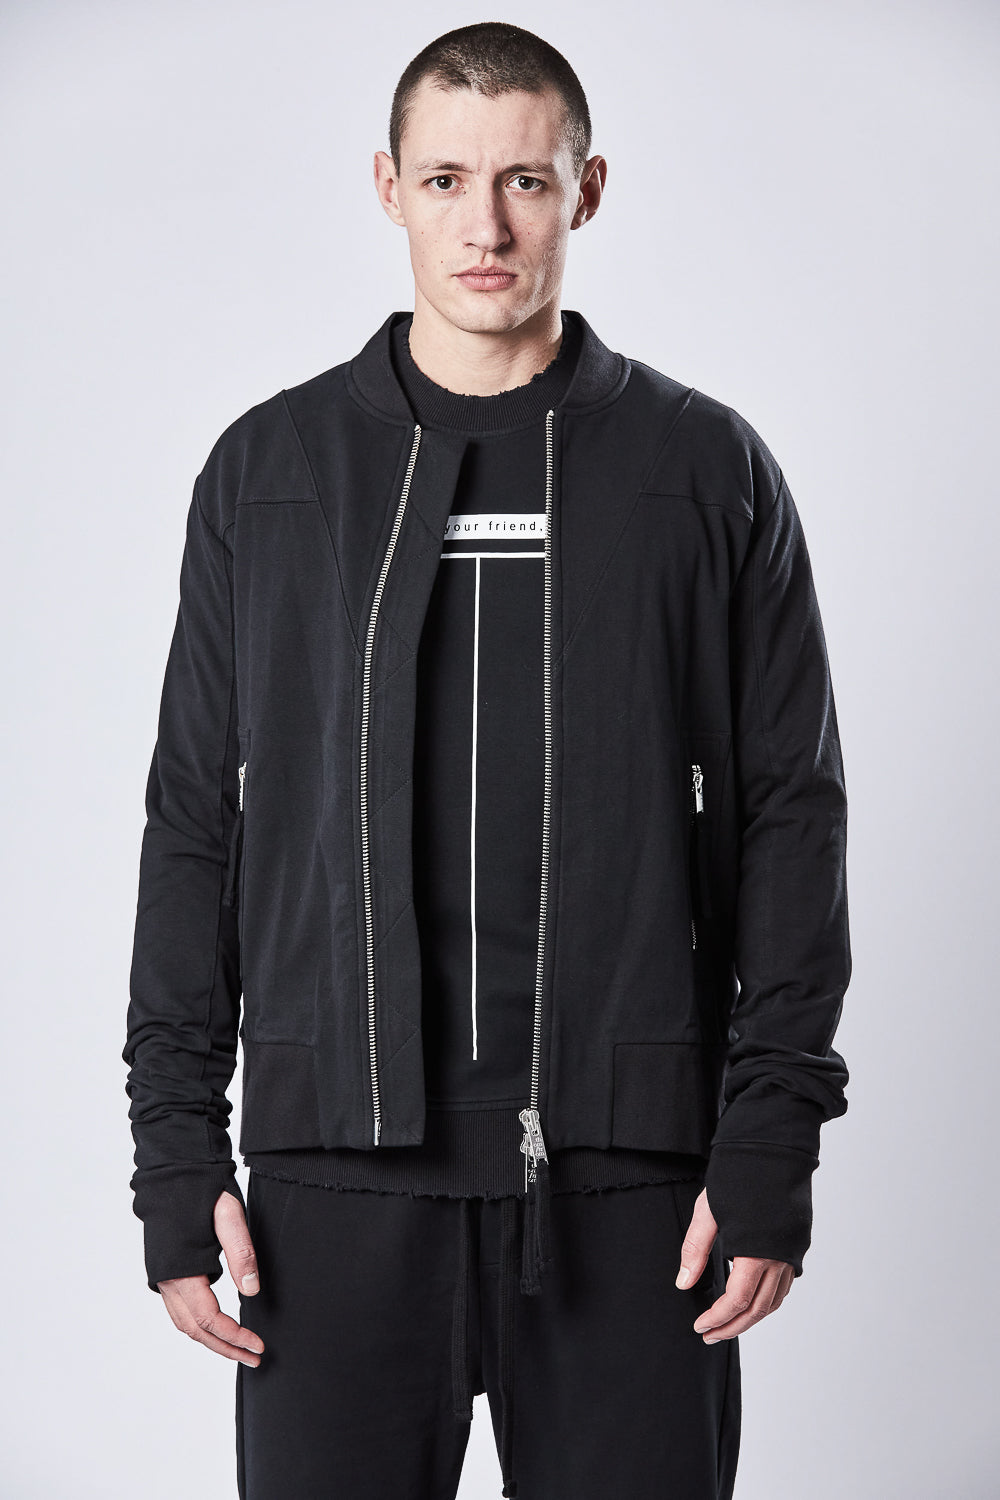 Buy the Thom Krom M SJ 617 Jacket in Black at Intro. Spend £50 for free UK delivery. Official stockists. We ship worldwide.